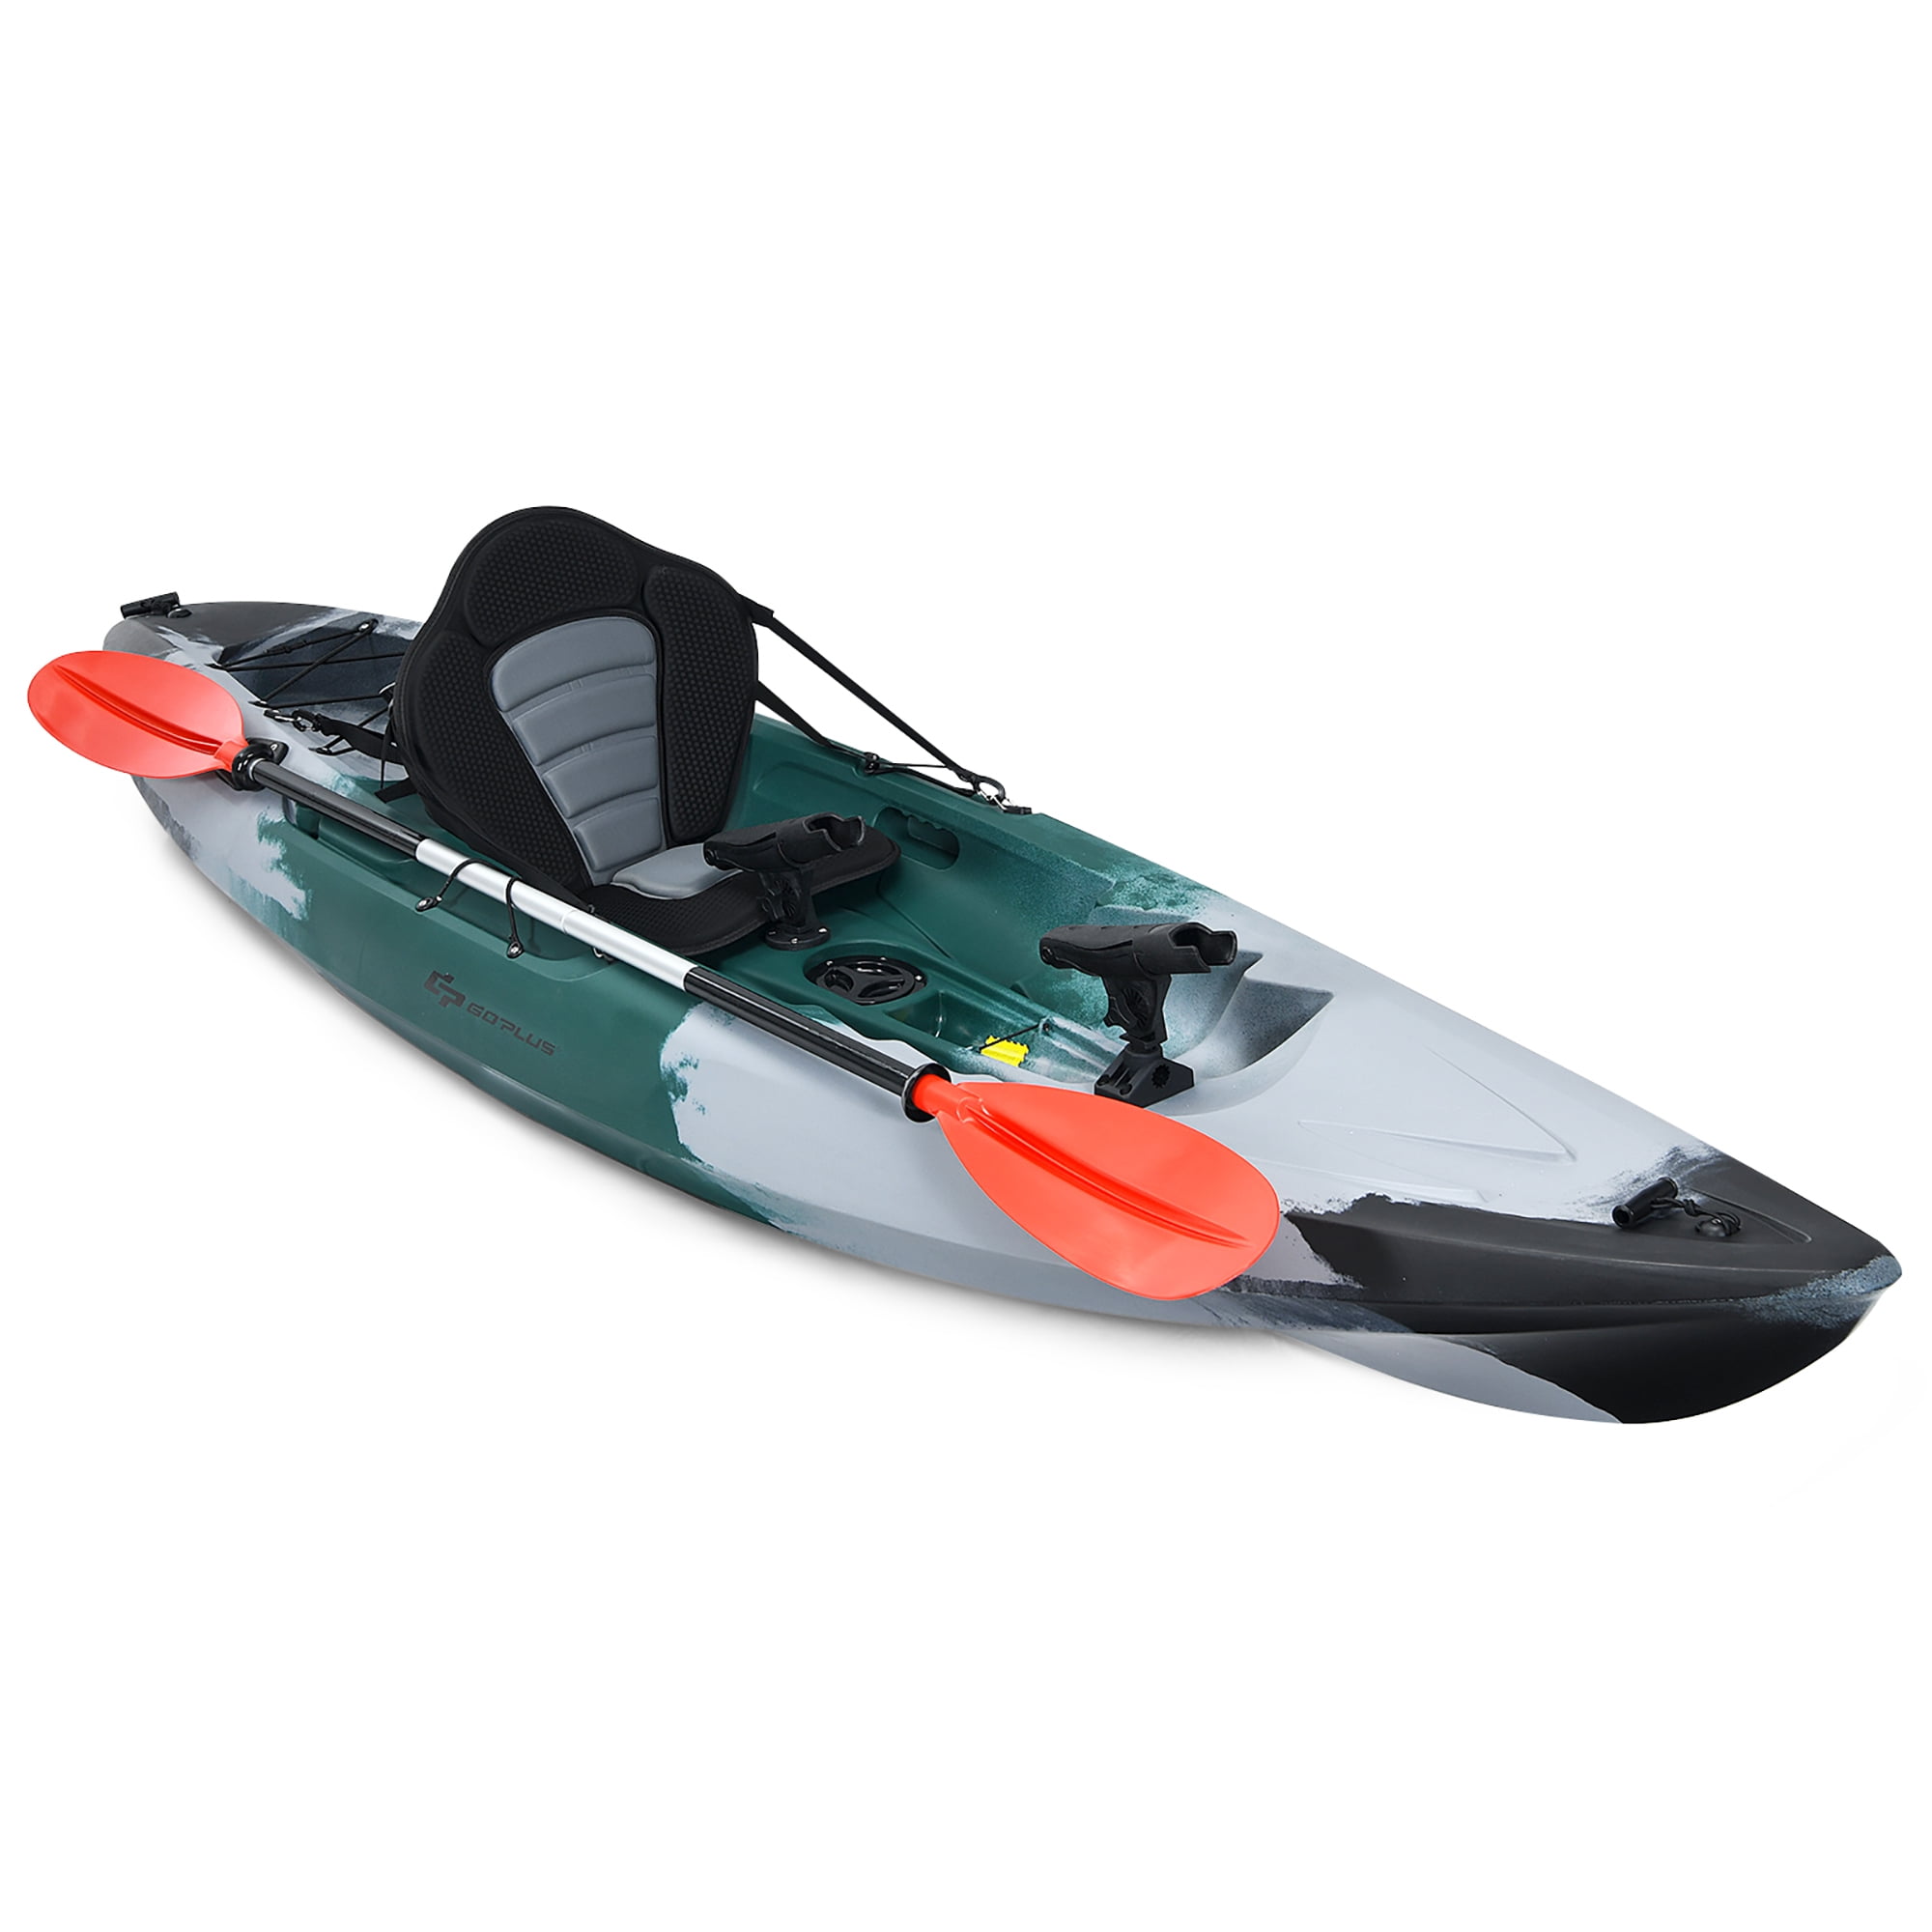 Goplus 1 Person Inflatable Kayak Includes Aluminum Paddle with 